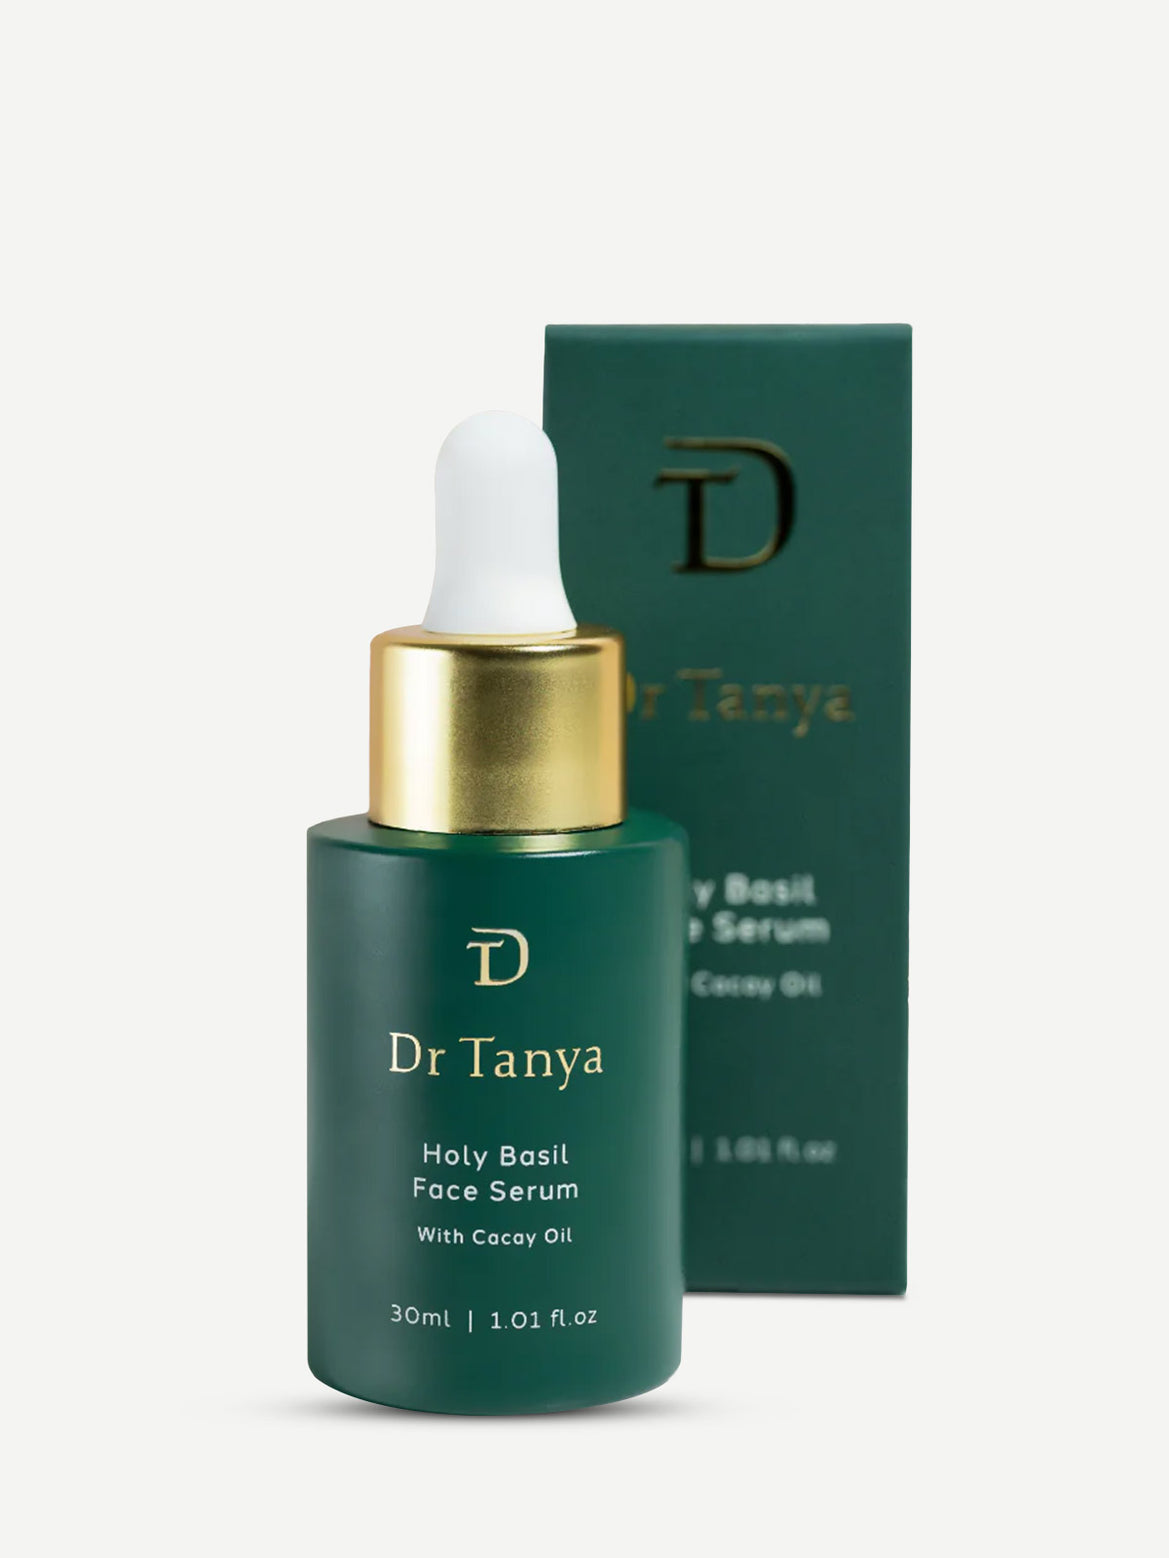 Dr Tanya - Brightening Holy Basil Face Serum with Holy Basil & Cacay Oil